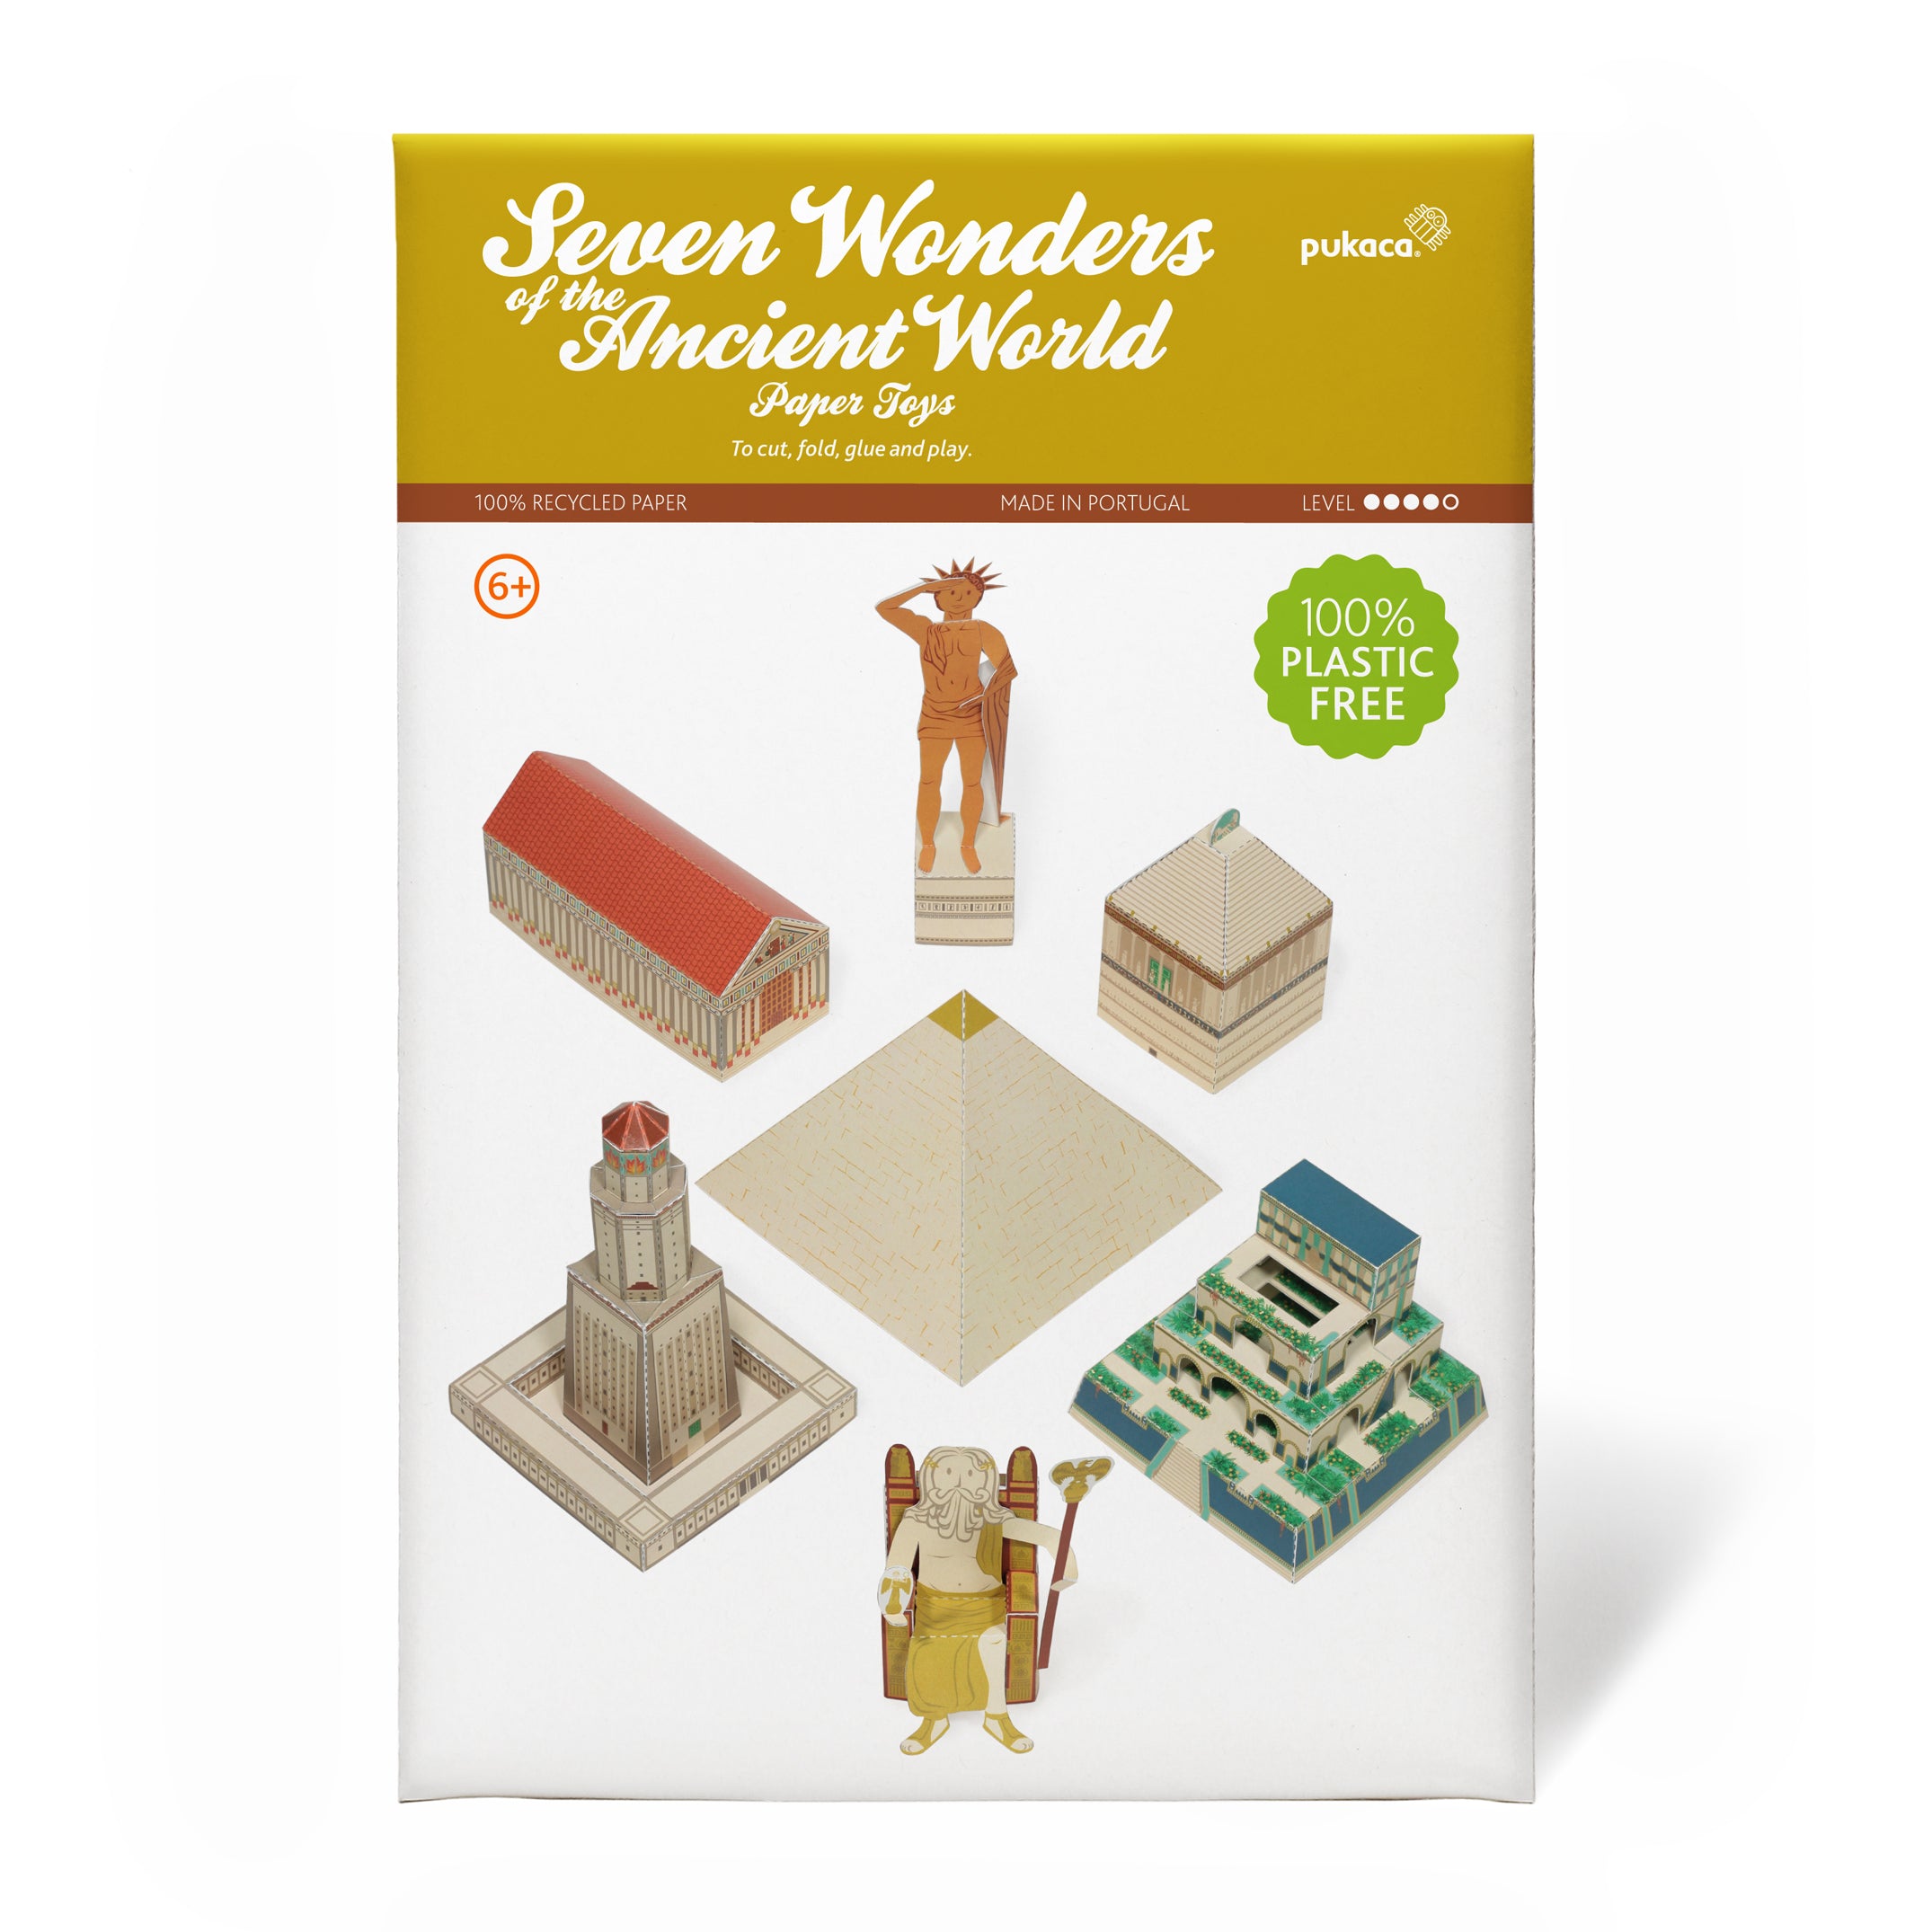 Board Game - Seven Wonders of the Ancient World Paper Toy